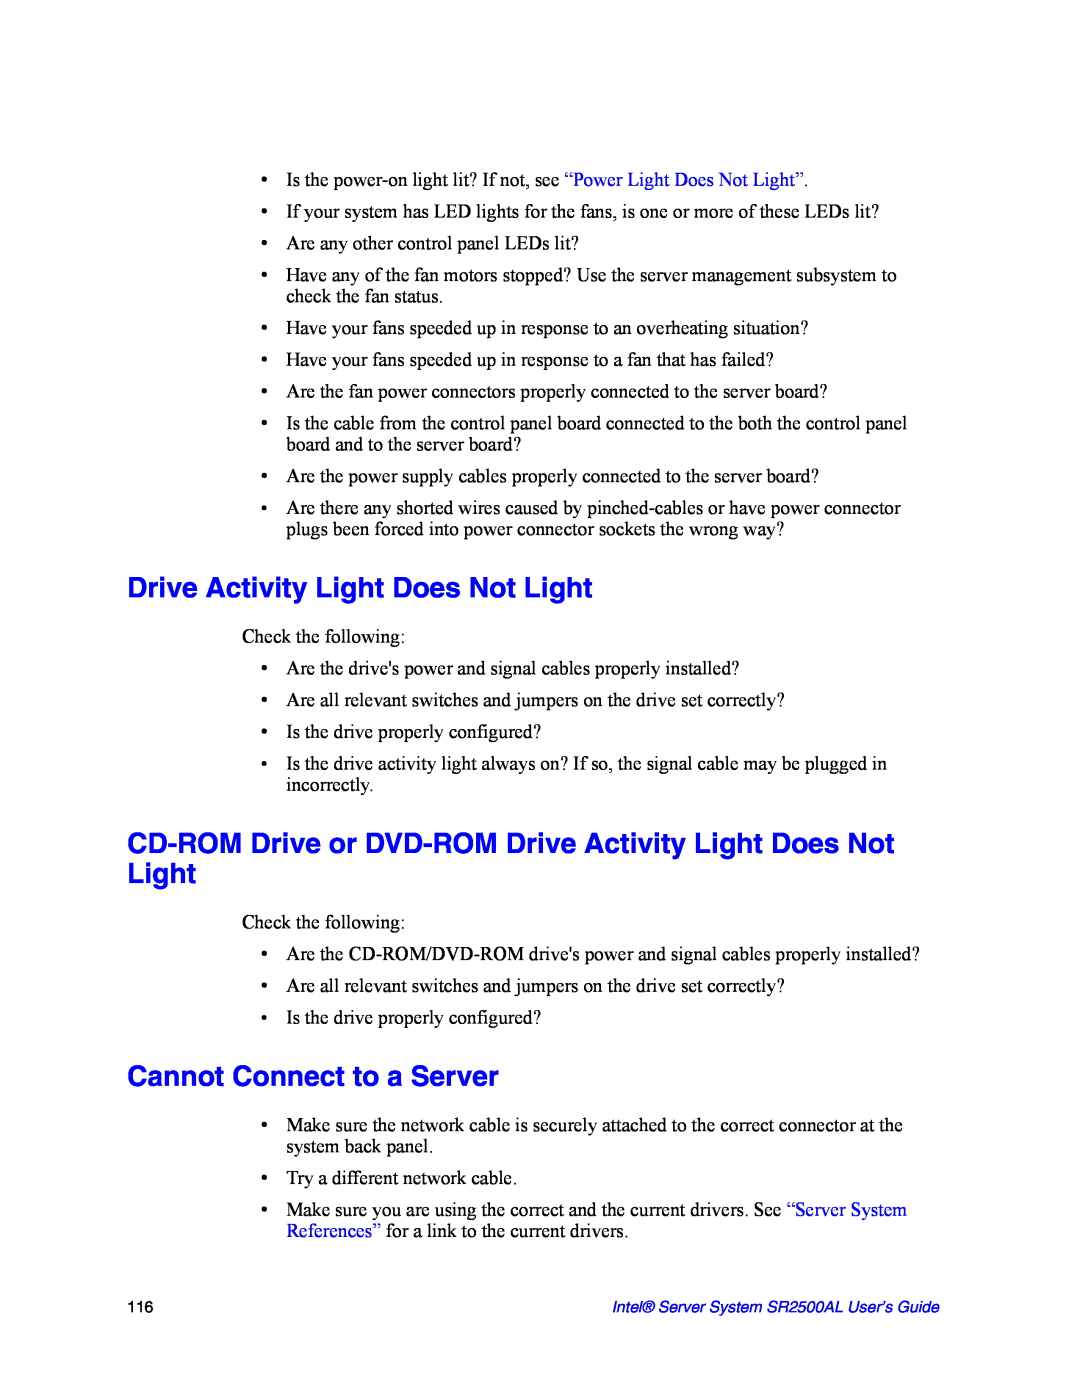 Intel SR2500AL manual CD-ROM Drive or DVD-ROM Drive Activity Light Does Not Light, Cannot Connect to a Server 